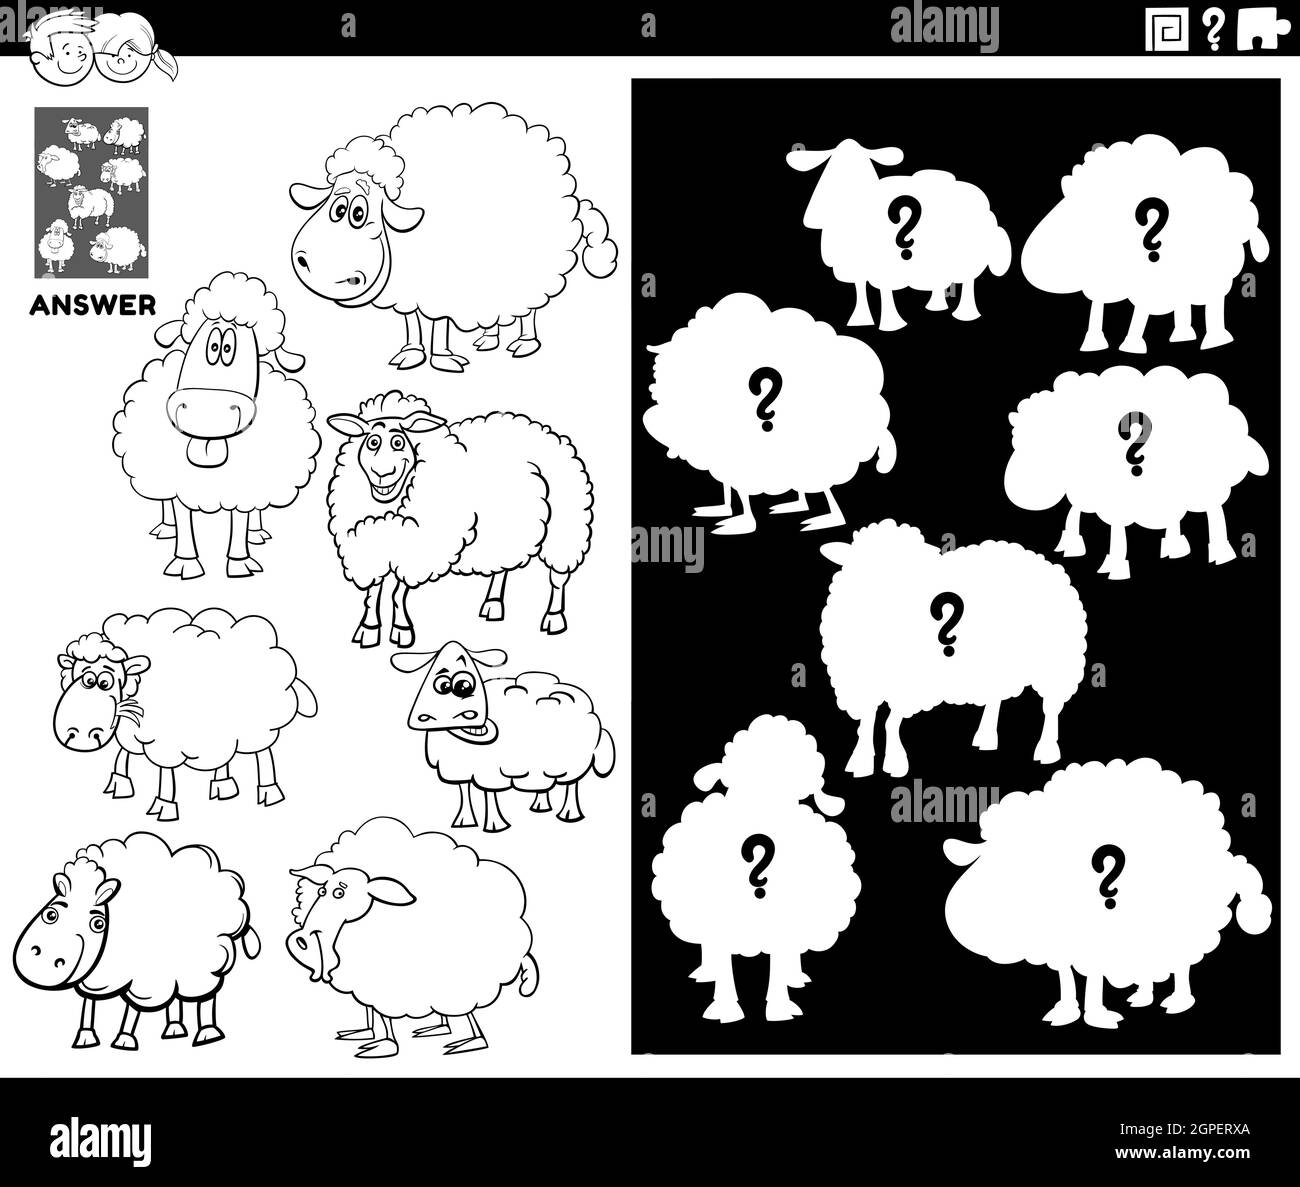 matching shapes game with sheep coloring book page Stock Vector